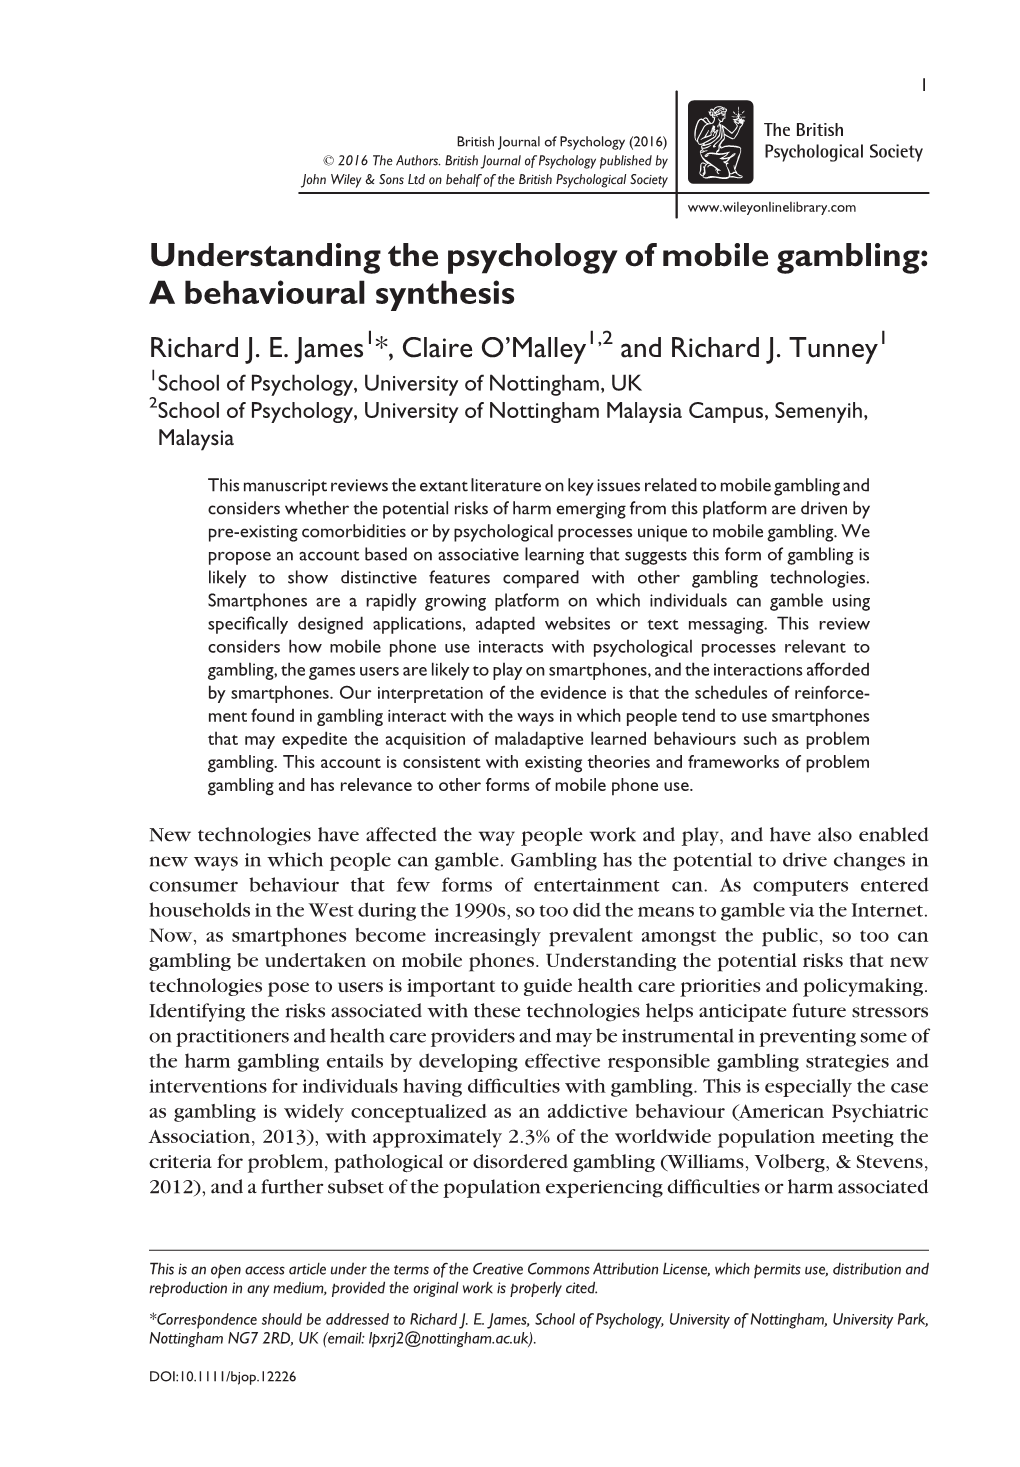 Understanding the Psychology of Mobile Gambling: a Behavioural Synthesis Richard J